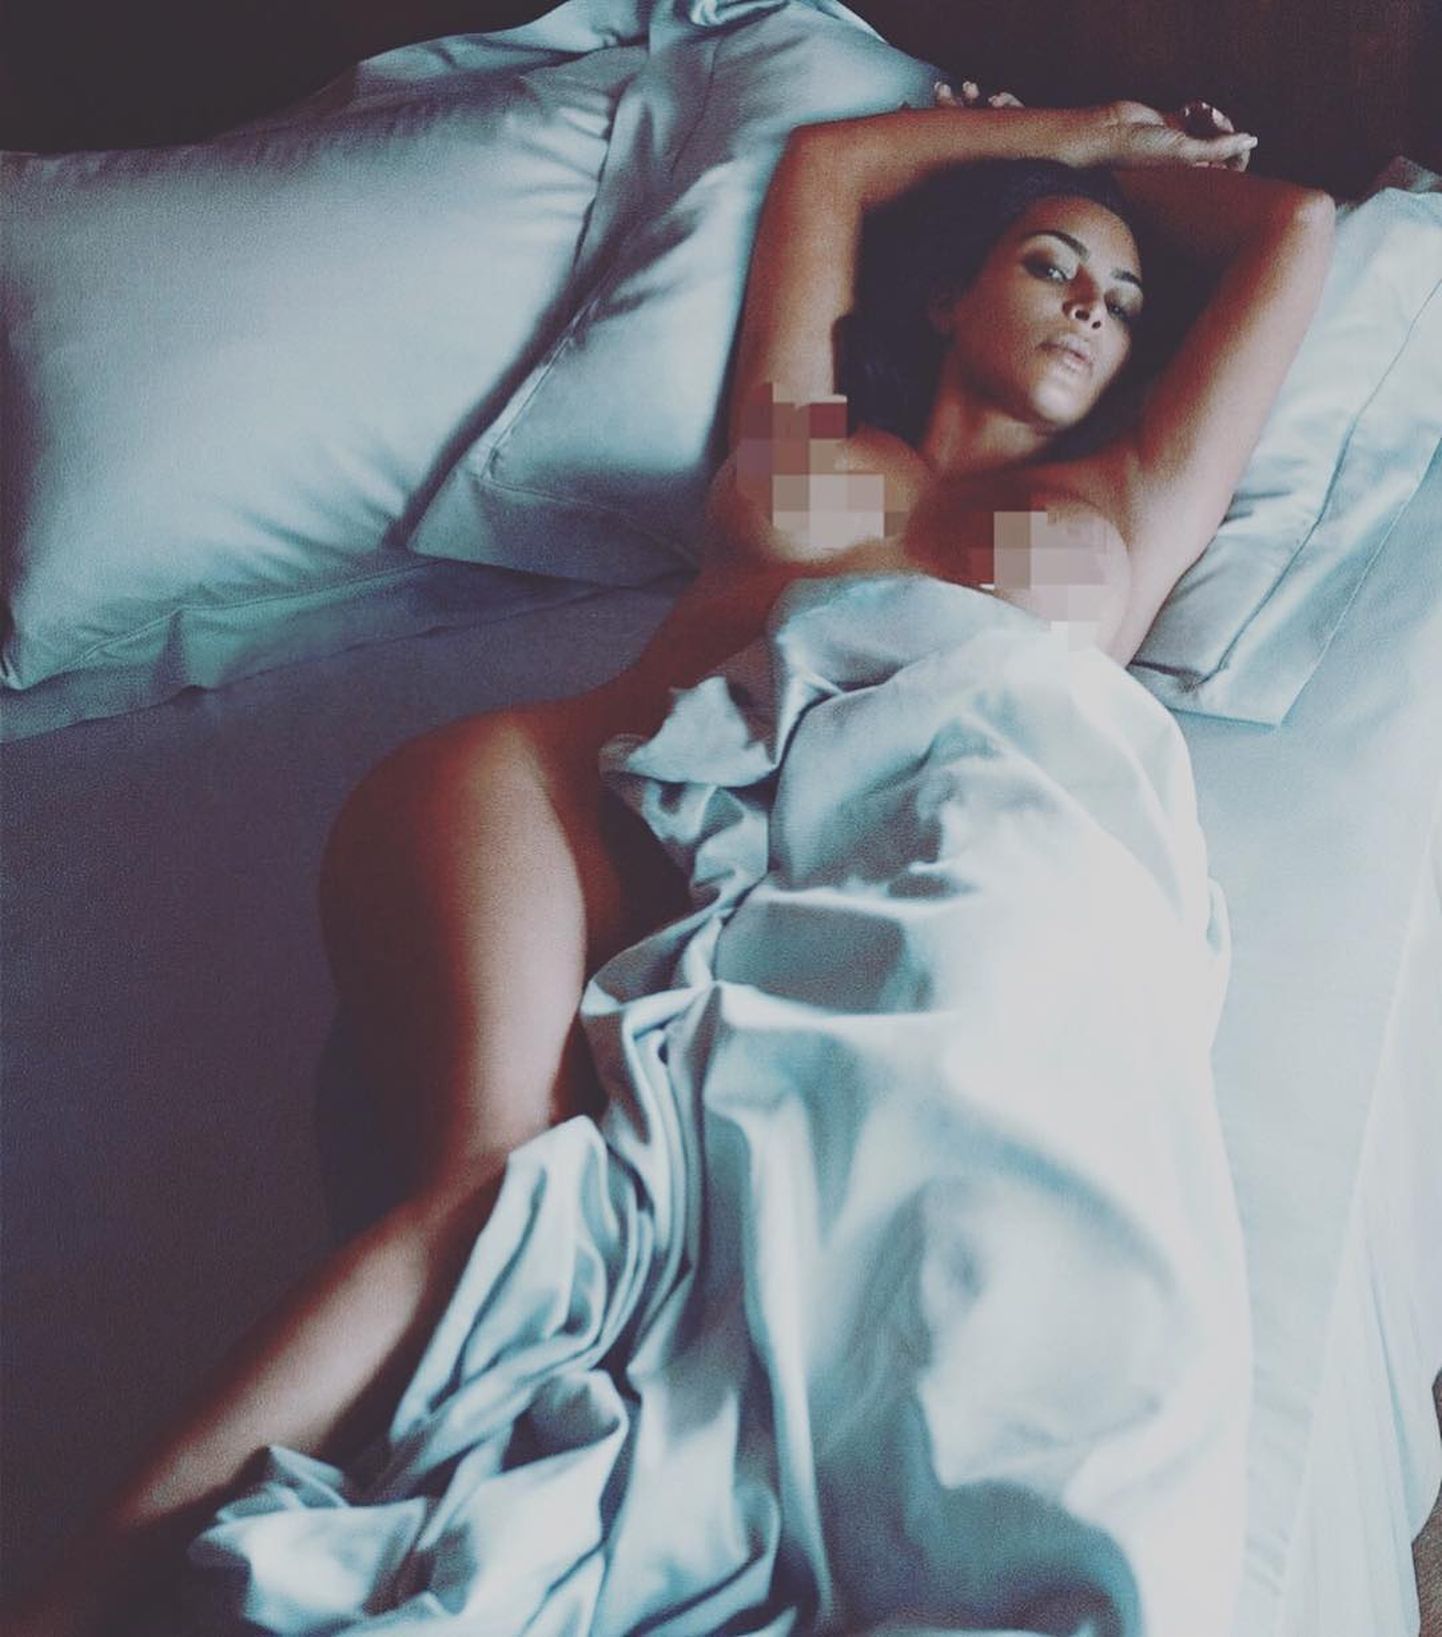 Kim Kardashian releases a photo on Instagram with the following caption: "Night Cap". Photo Credit: Instagram *** No USA Distribution *** For Editorial Use Only *** Not to be Published in Books or Photo Books ***  Please note: Fees charged by the agency are for the agency